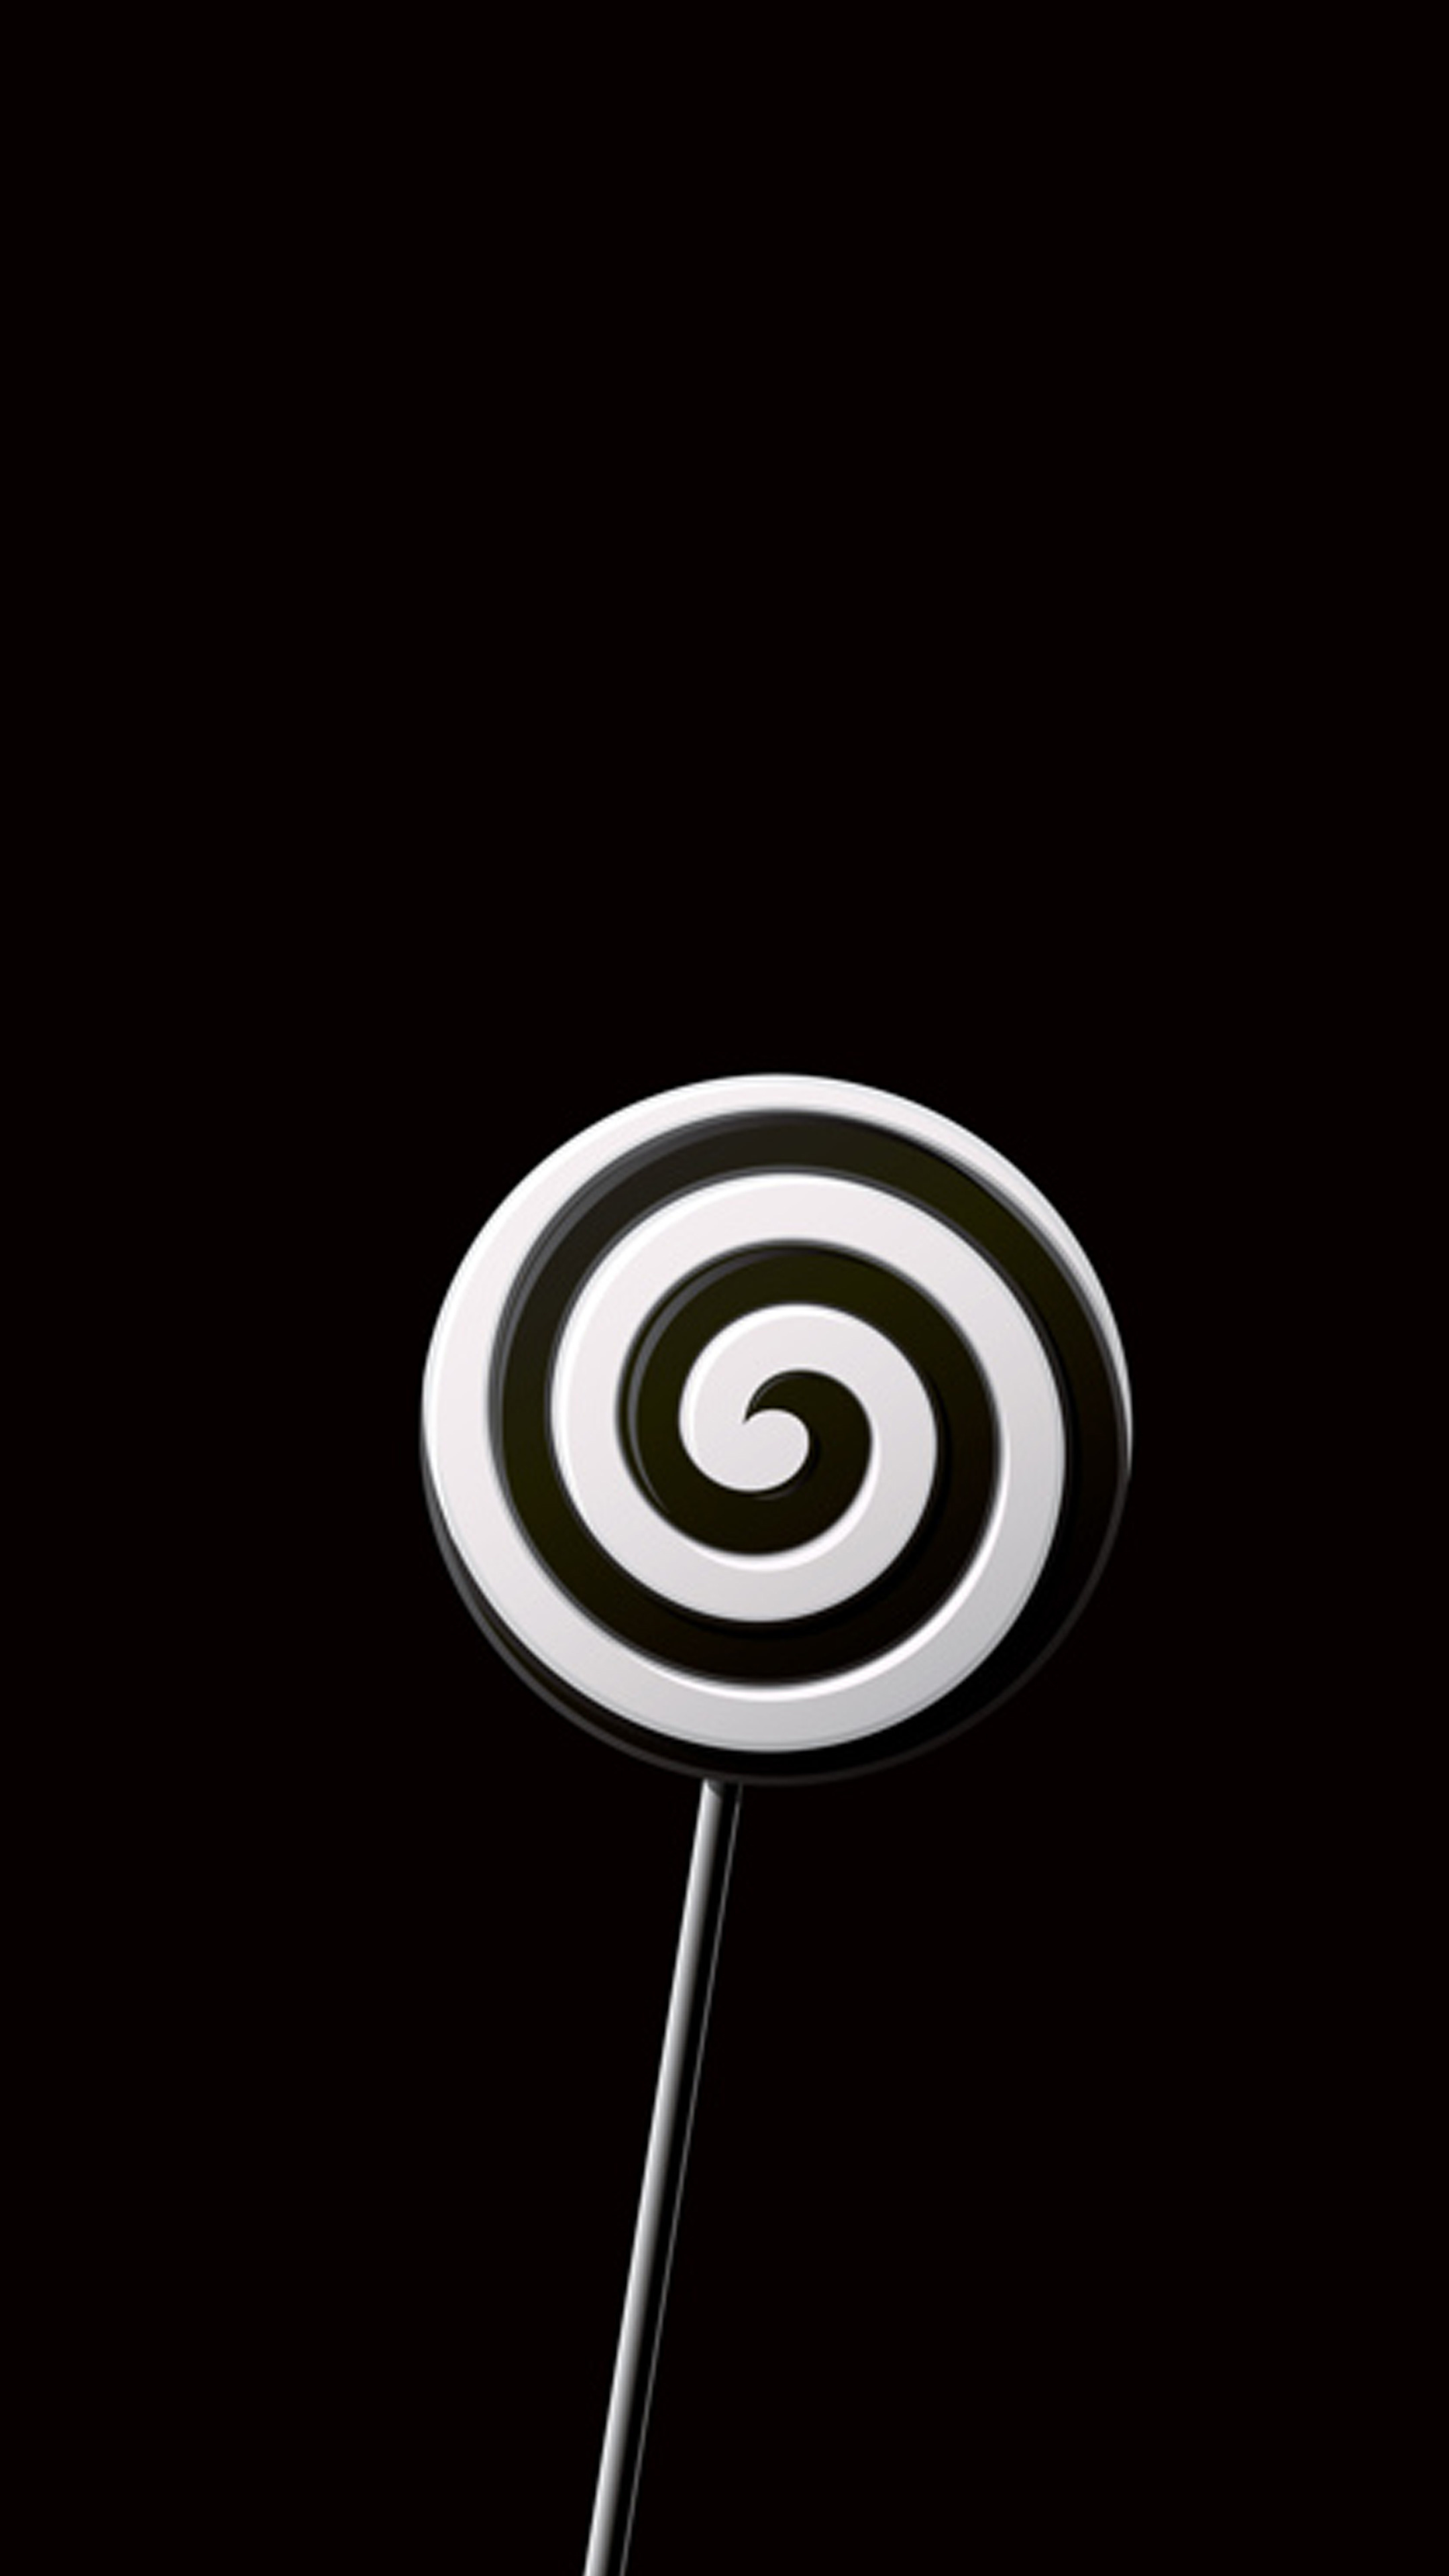 Mobile lollipop wallpaper, Compact and cute, Sweet and playful, Perfect addition to your phone, 2160x3840 4K Phone